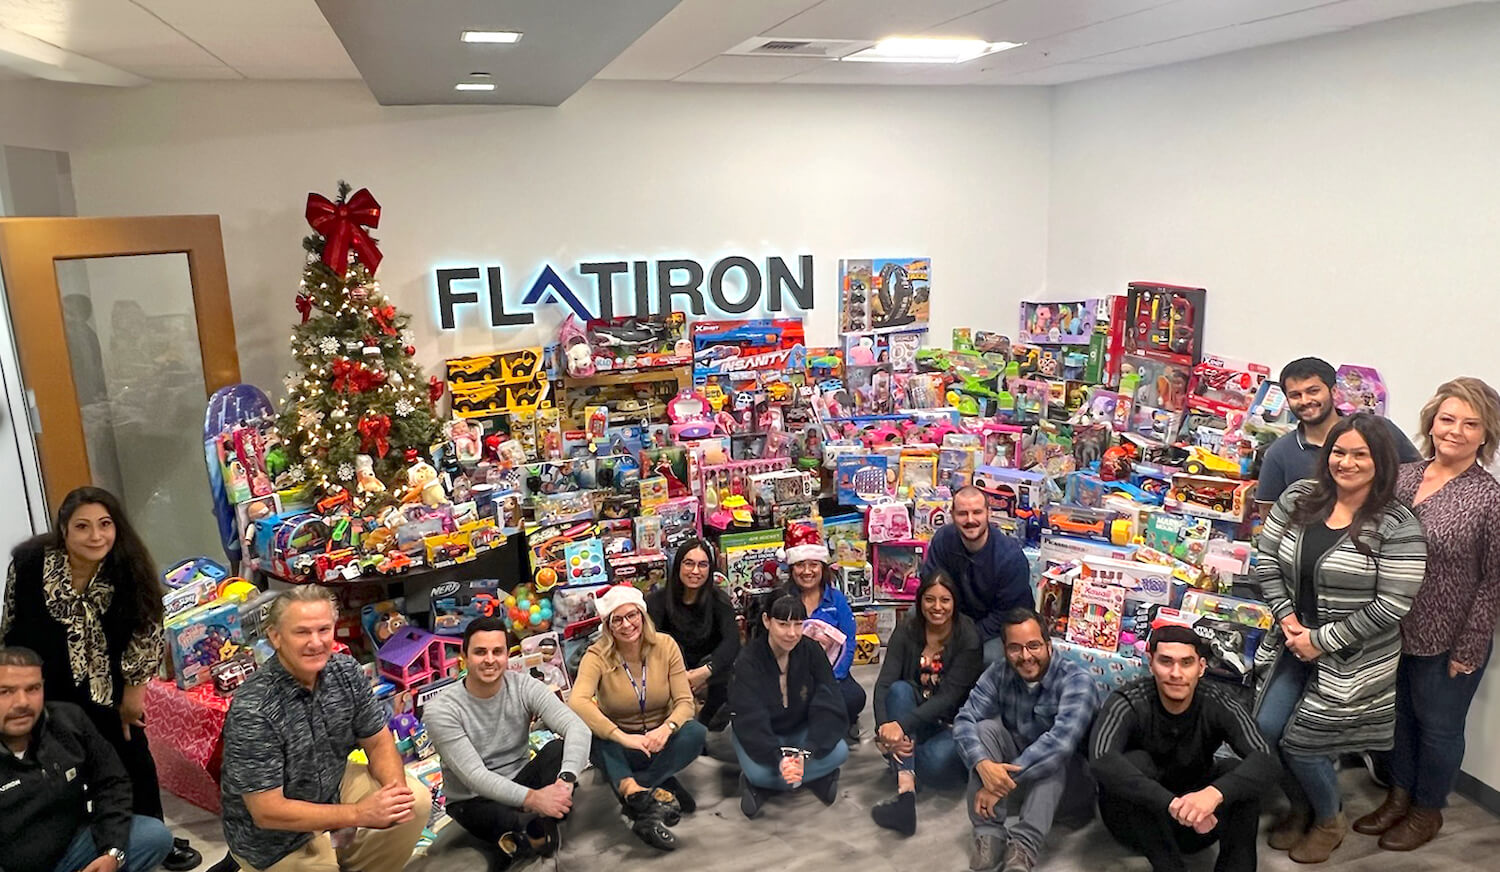 Flatiron employees organized a toy drive for children in need